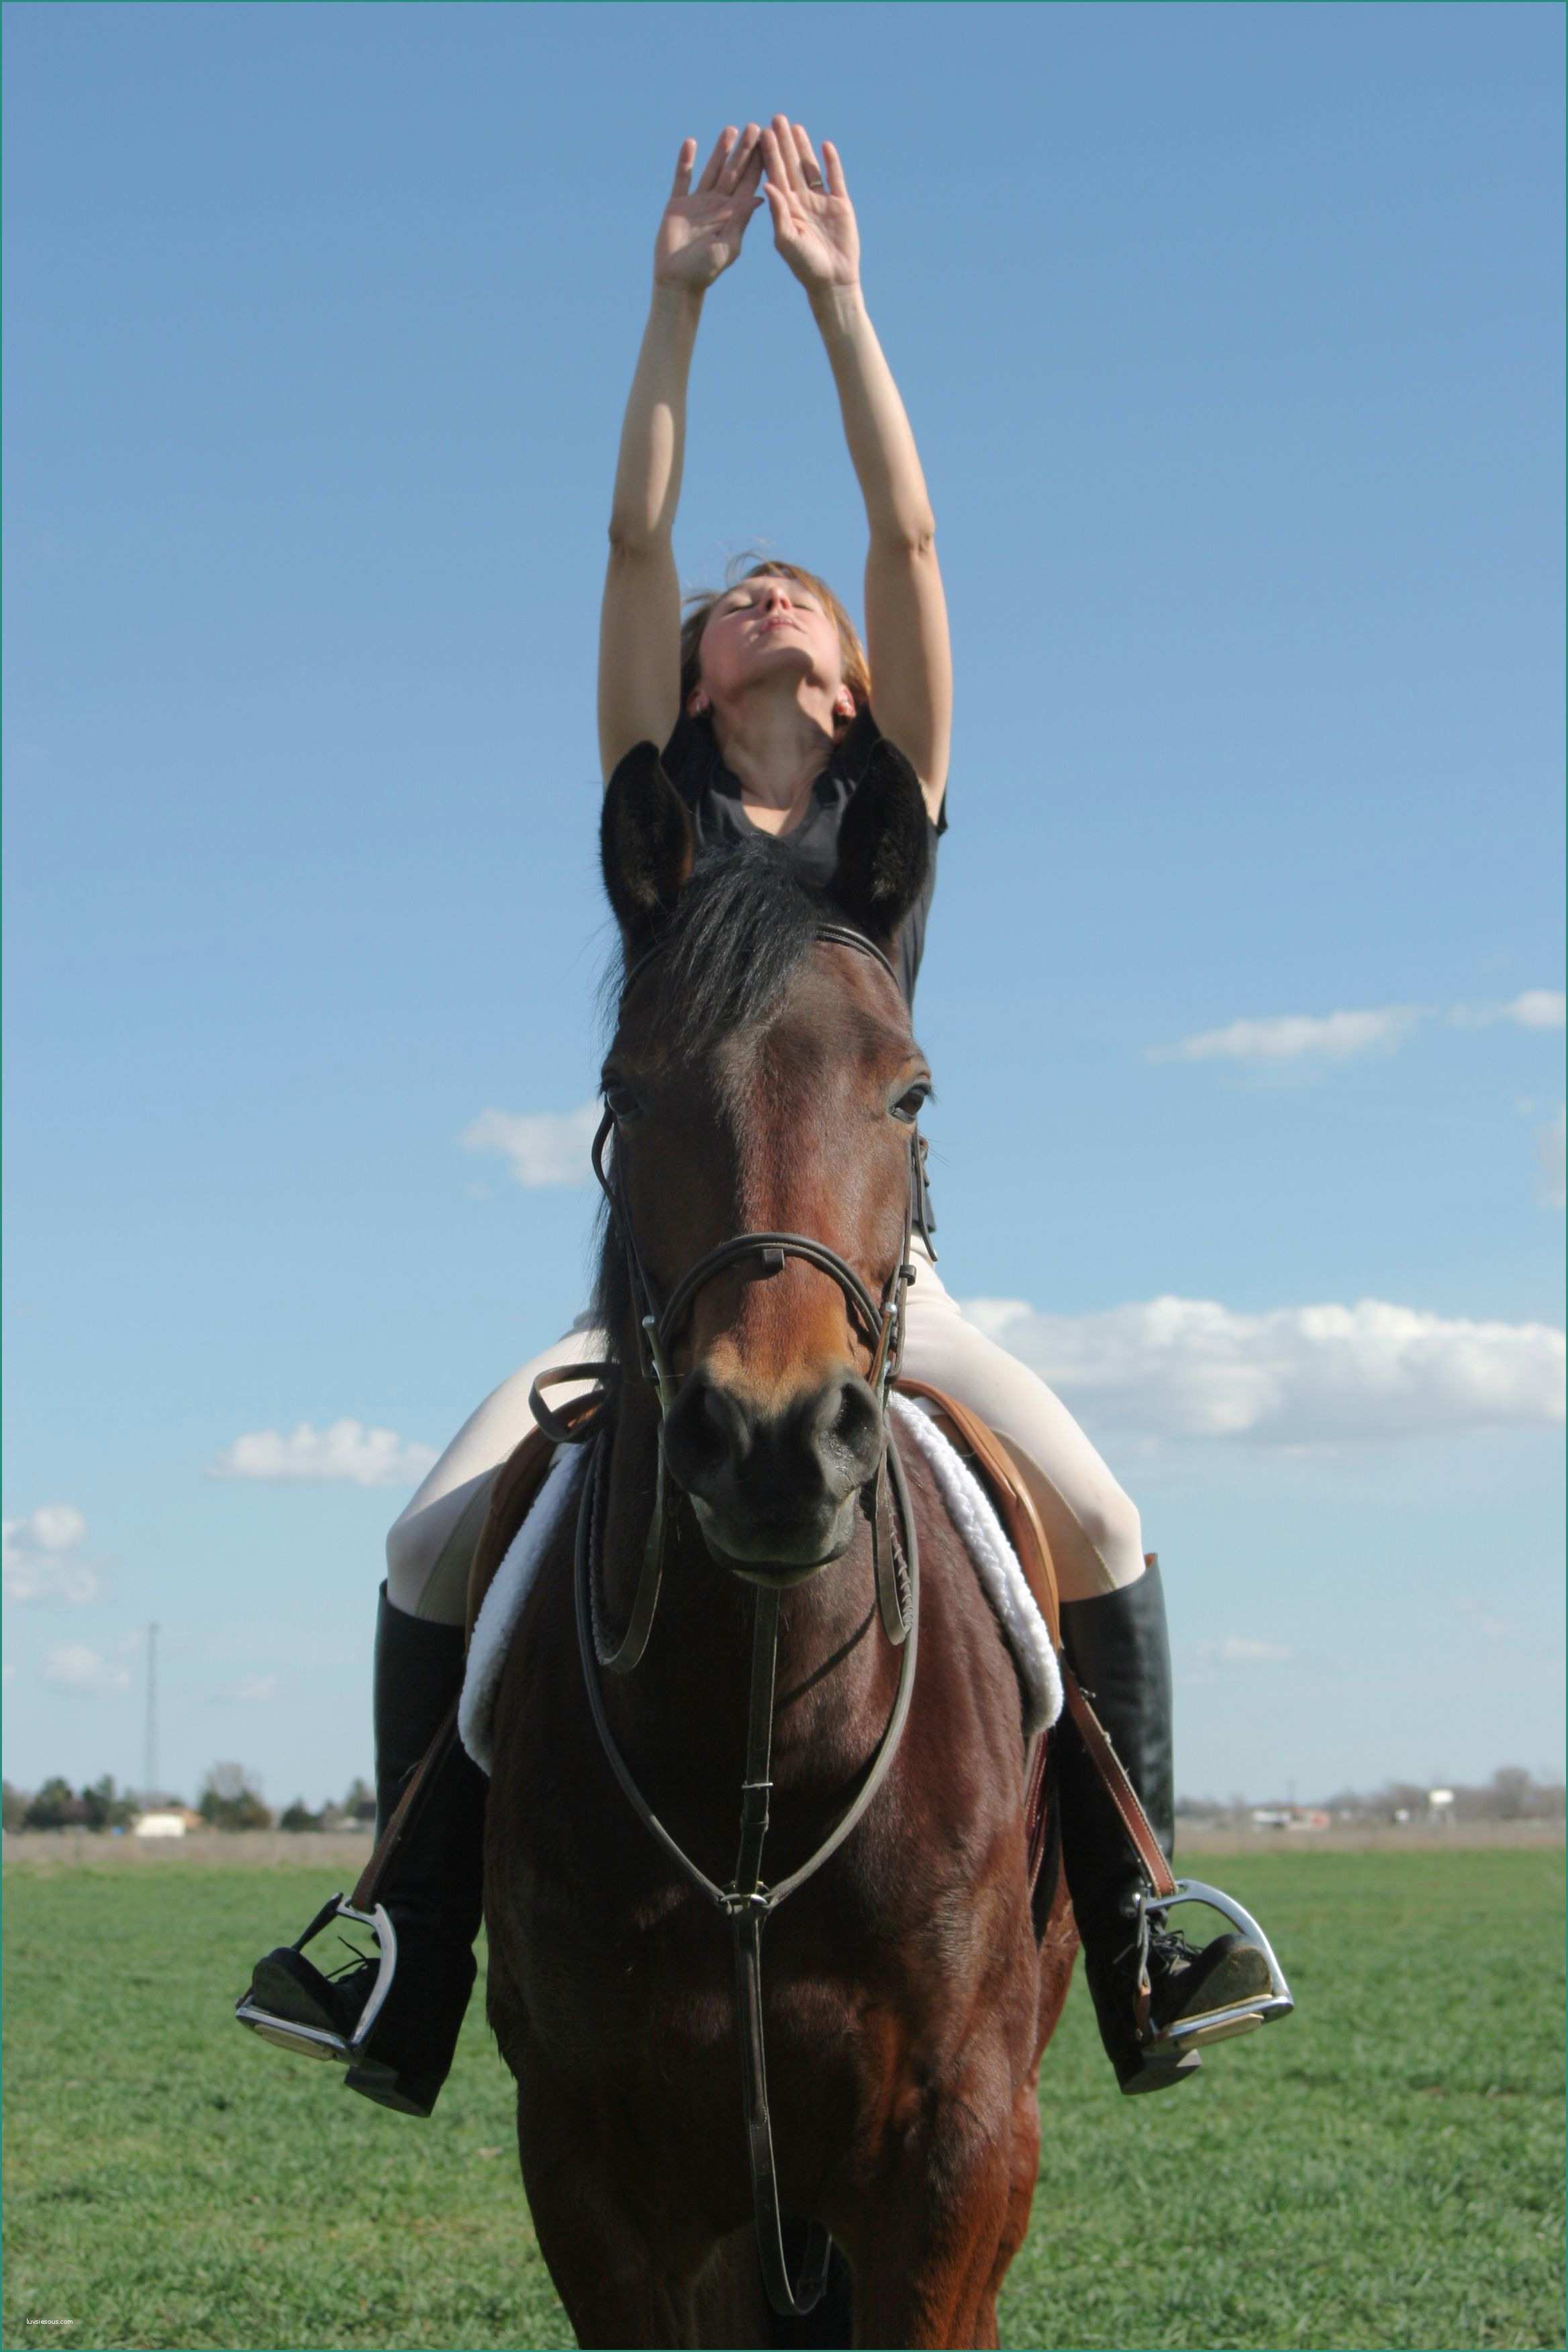 Serpenti Nei sogni E Yoga for Riders to Help Stay Relaxed In the Saddle